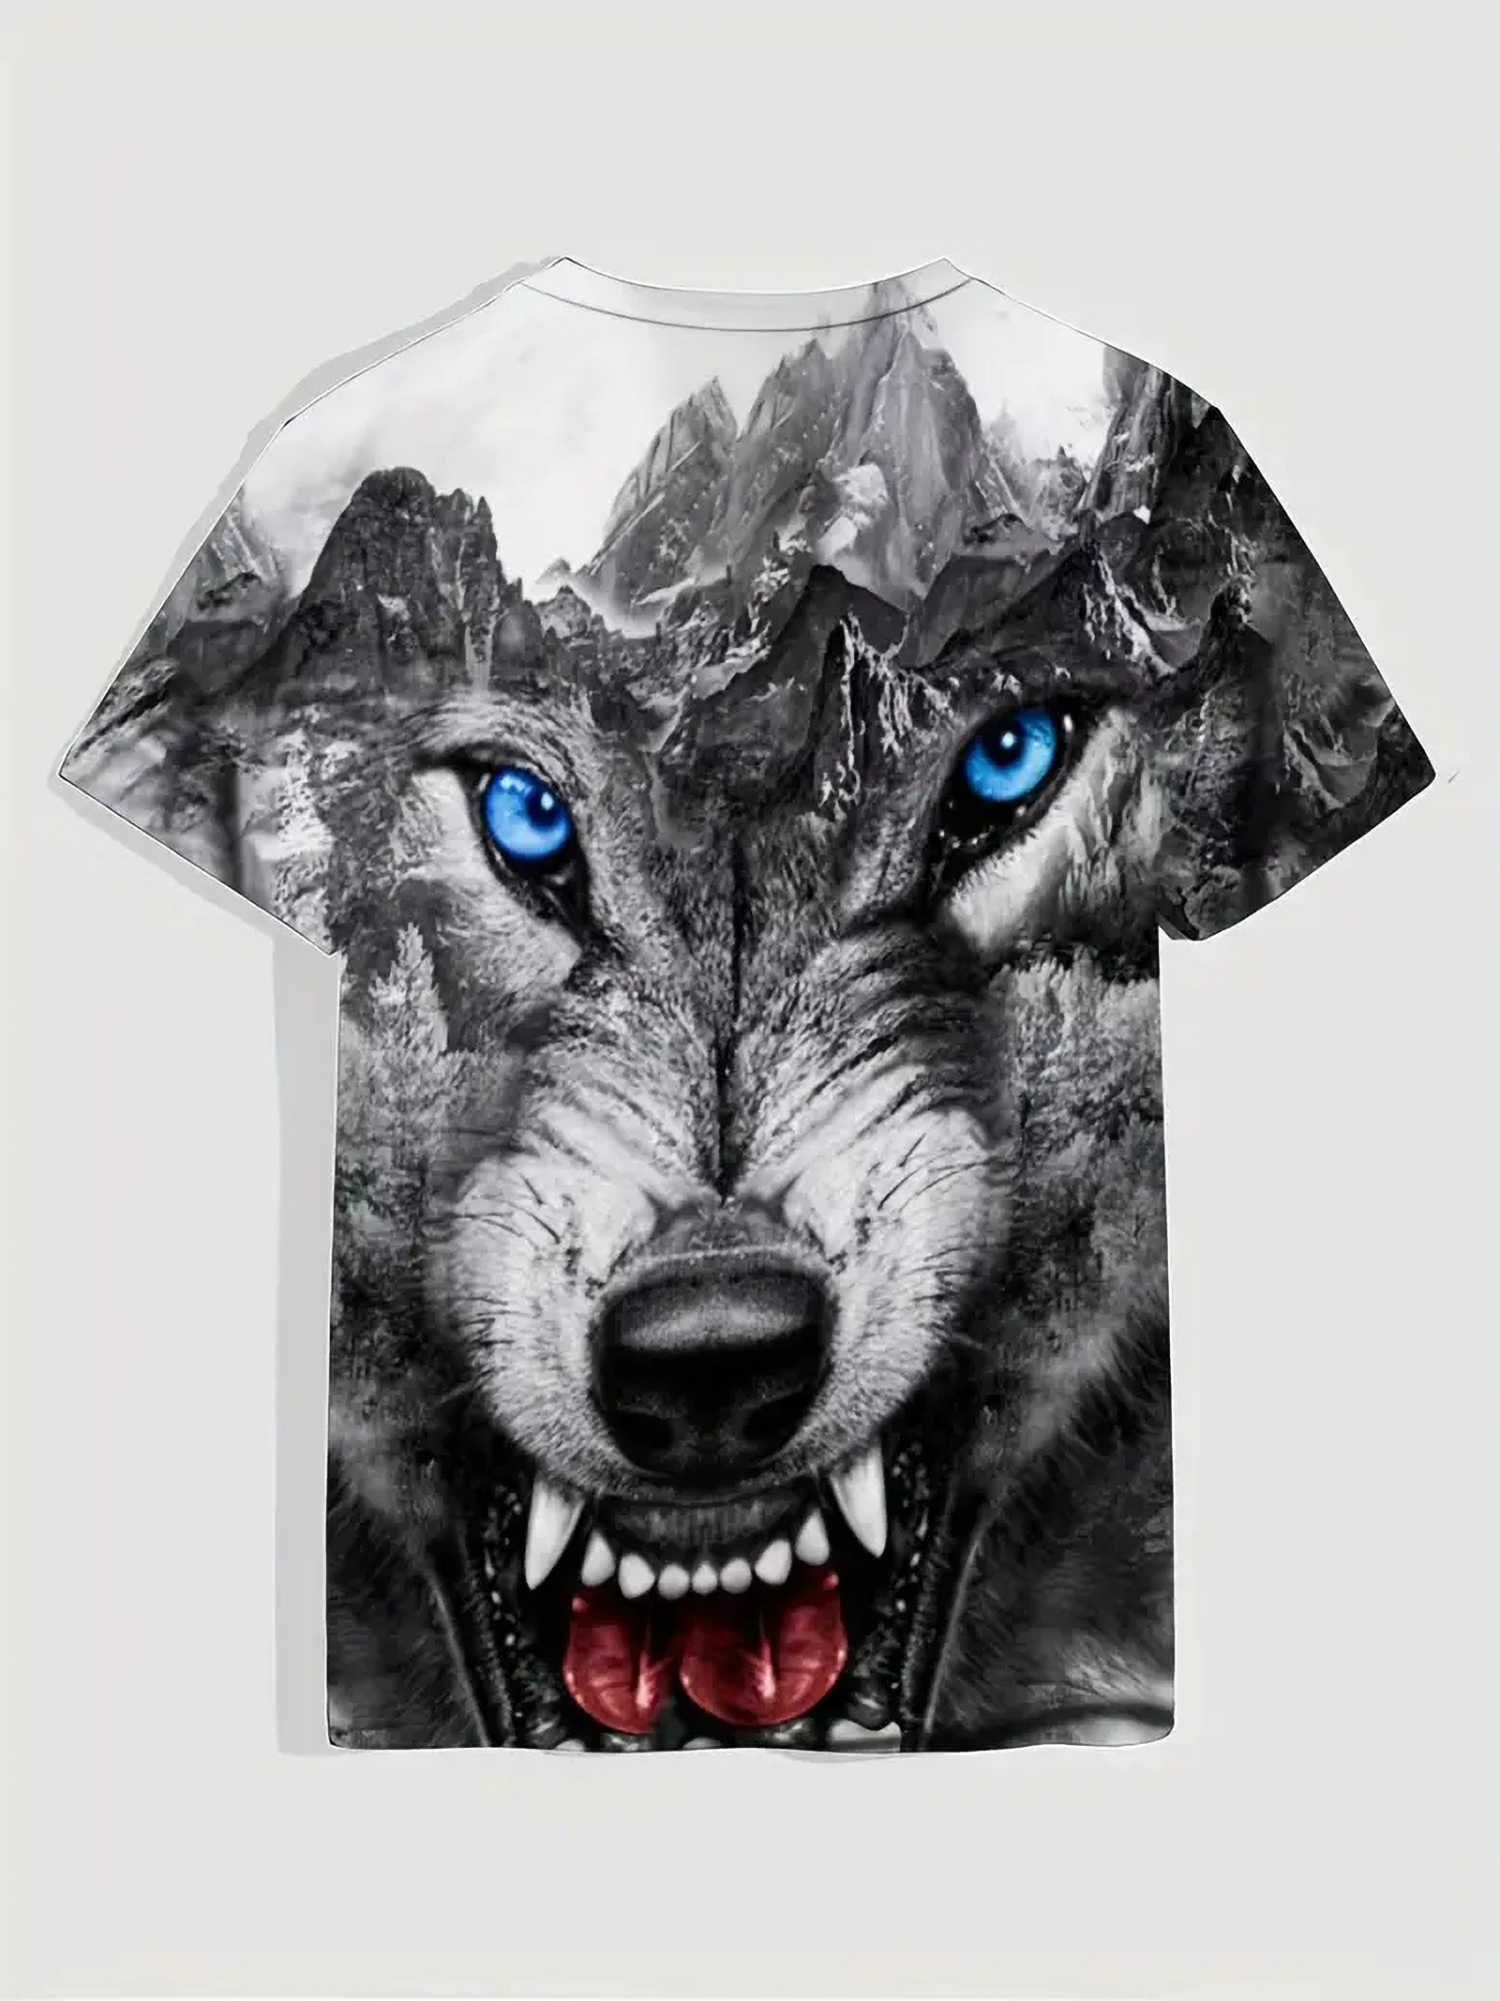 Stylish 3D Digital Mountain & Wolf Pattern Print Graphic T-shirts, Causal  Tees, Short Sleeves Comfortable Pullover Tops, Men's Summer Clothing